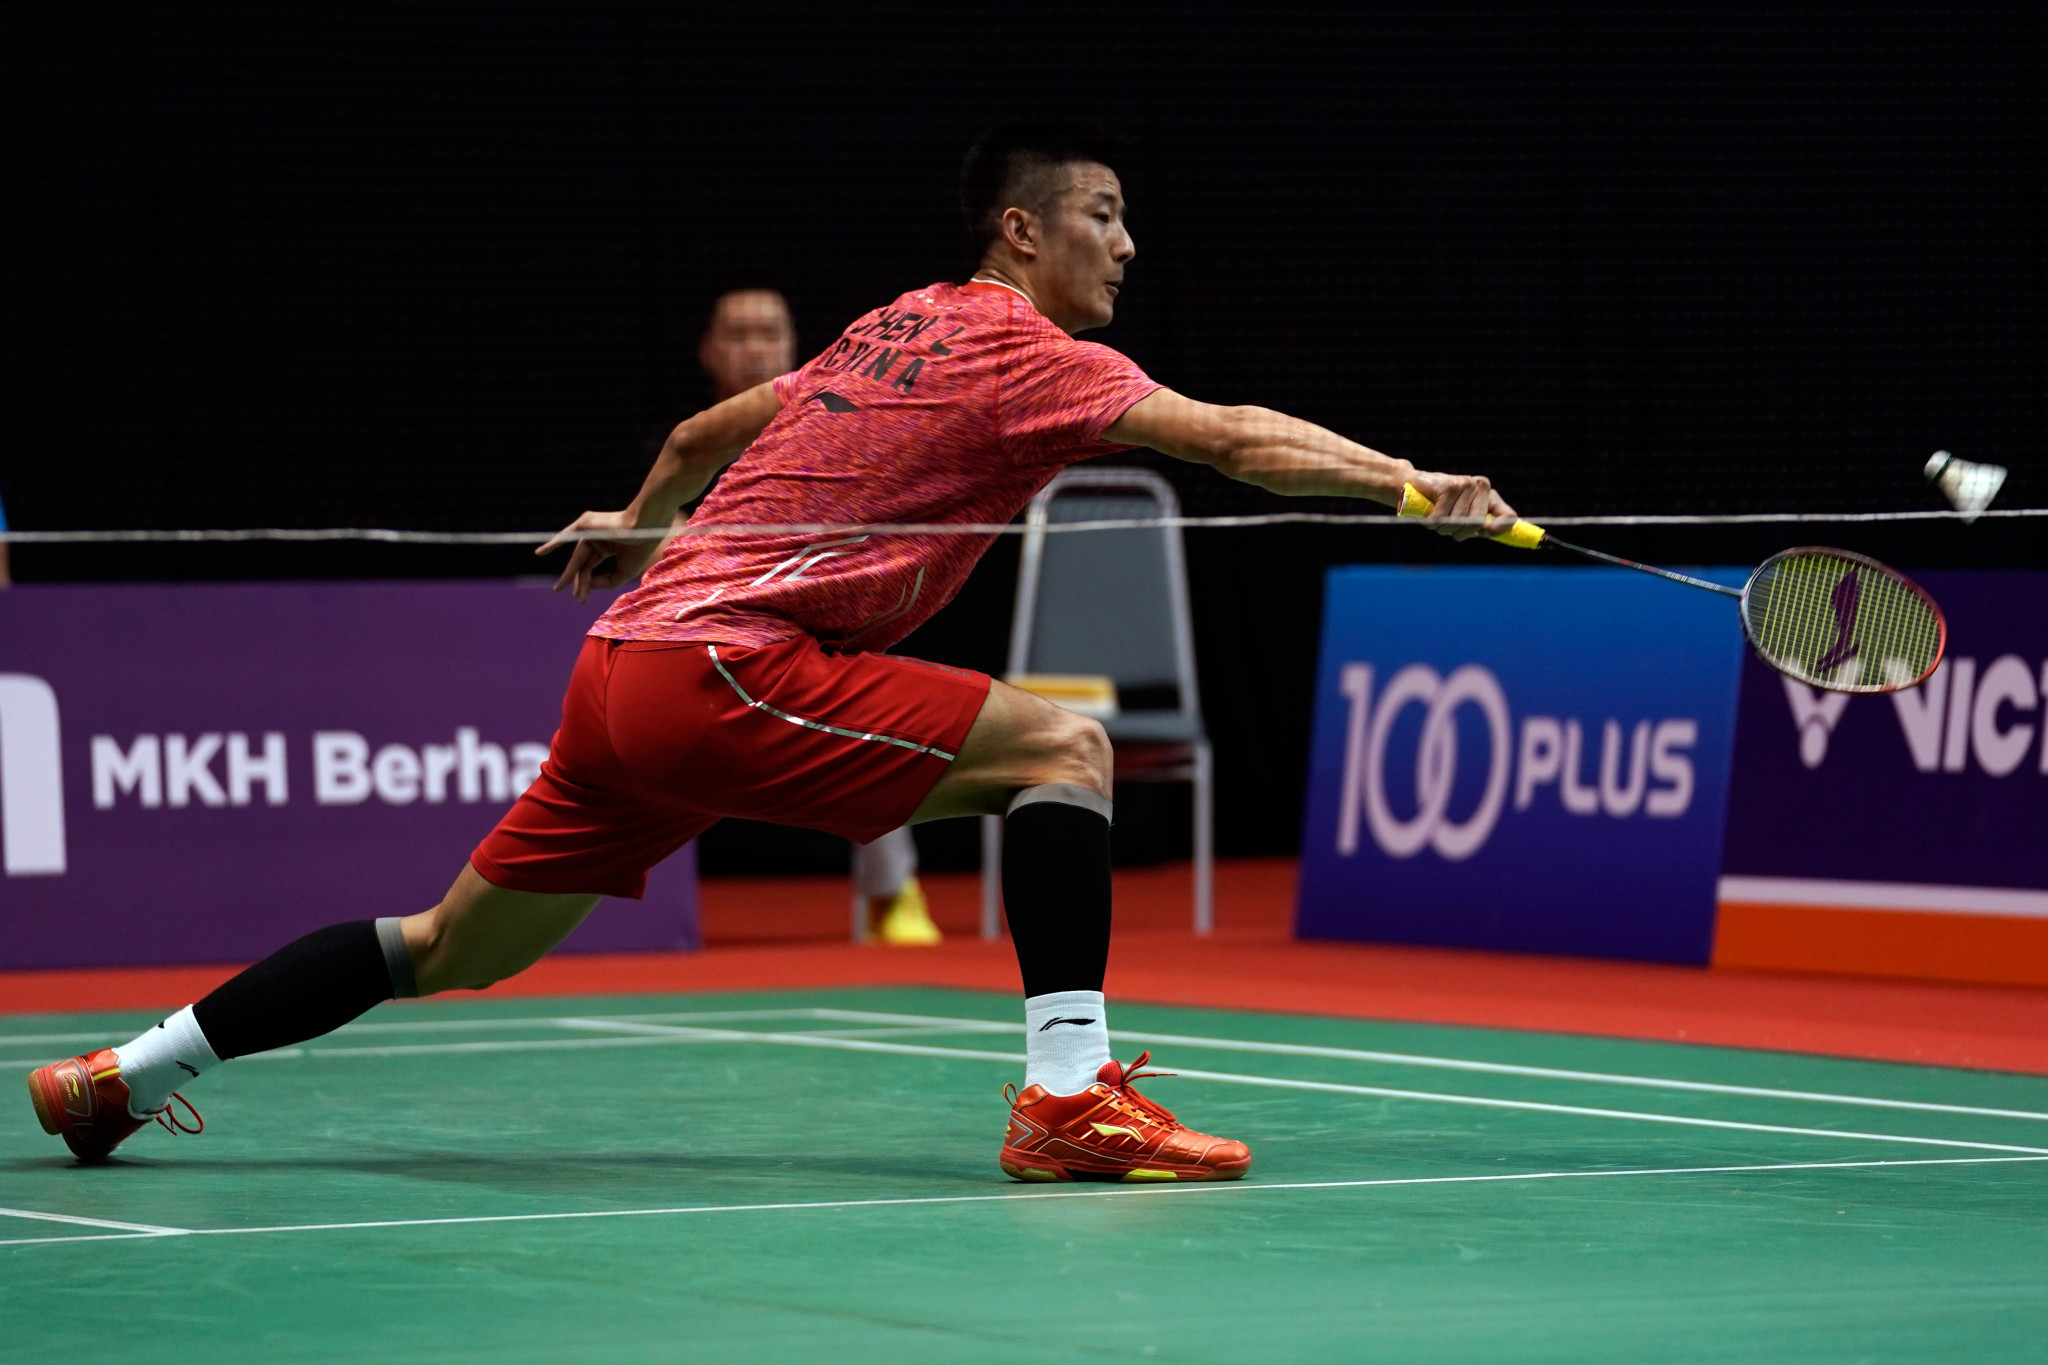 China's Chen Long, who is looking to defend his title at the Badminton Asia Championships, has received confirmation of his first-round opponent following qualifying matches today ©Getty Images